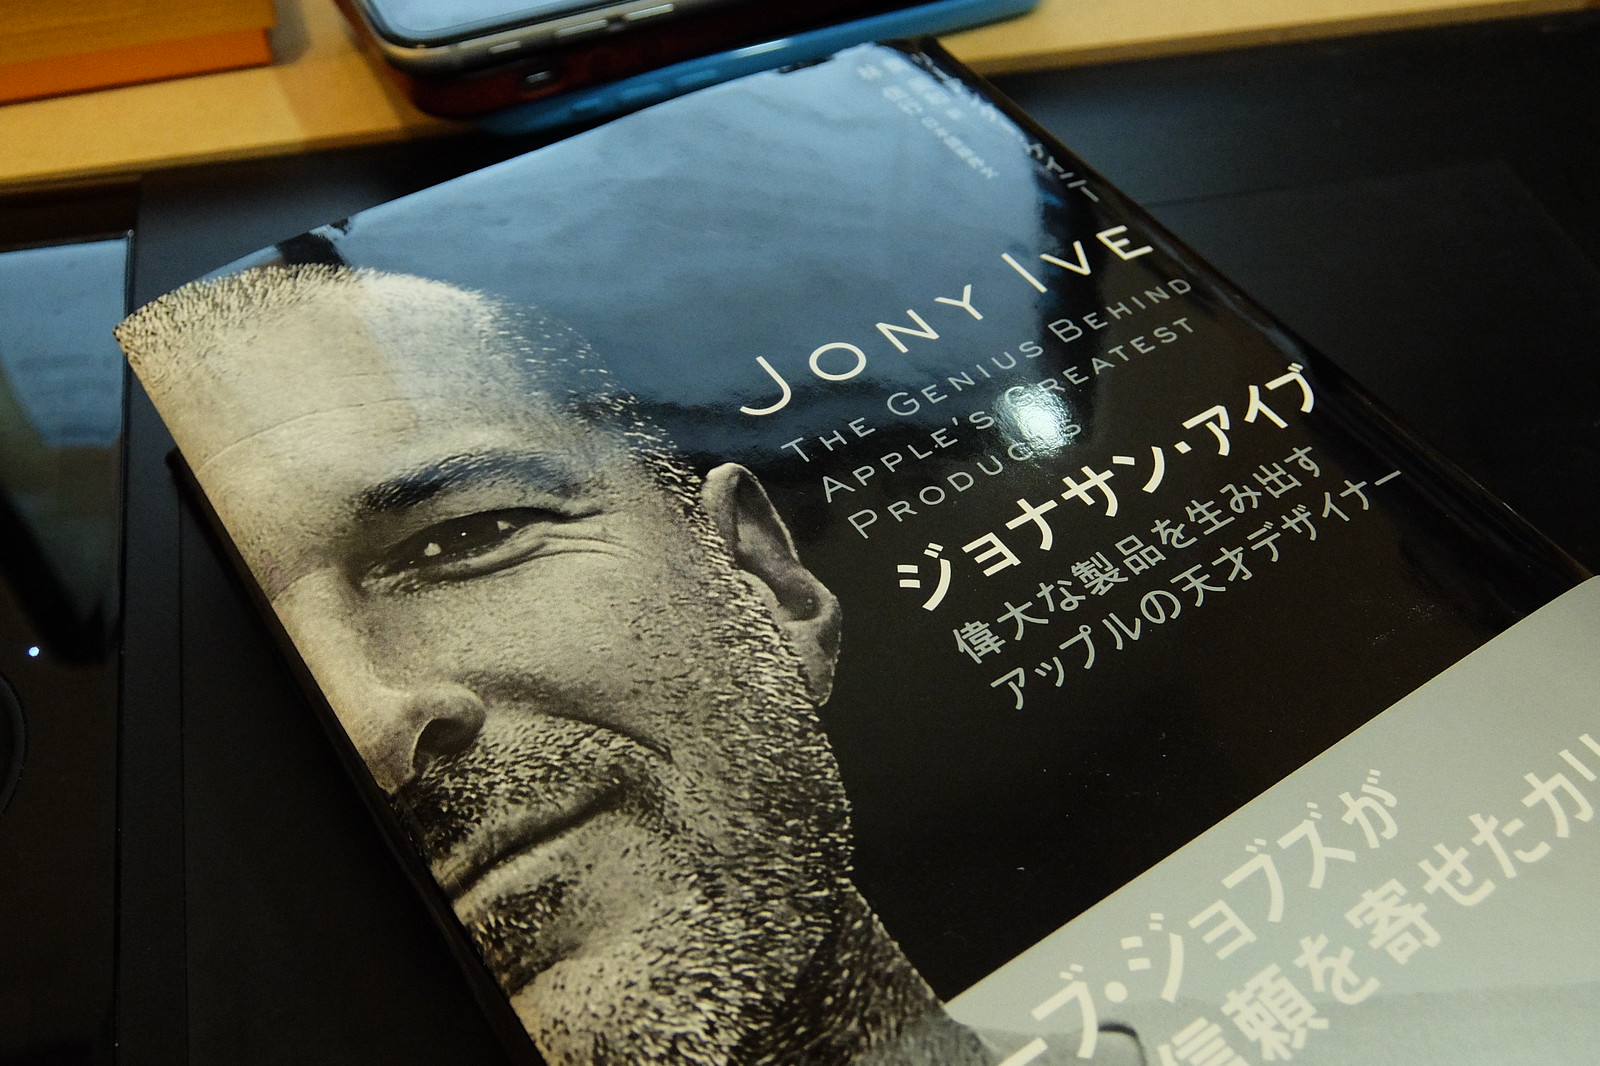 a Book about Jony Ive